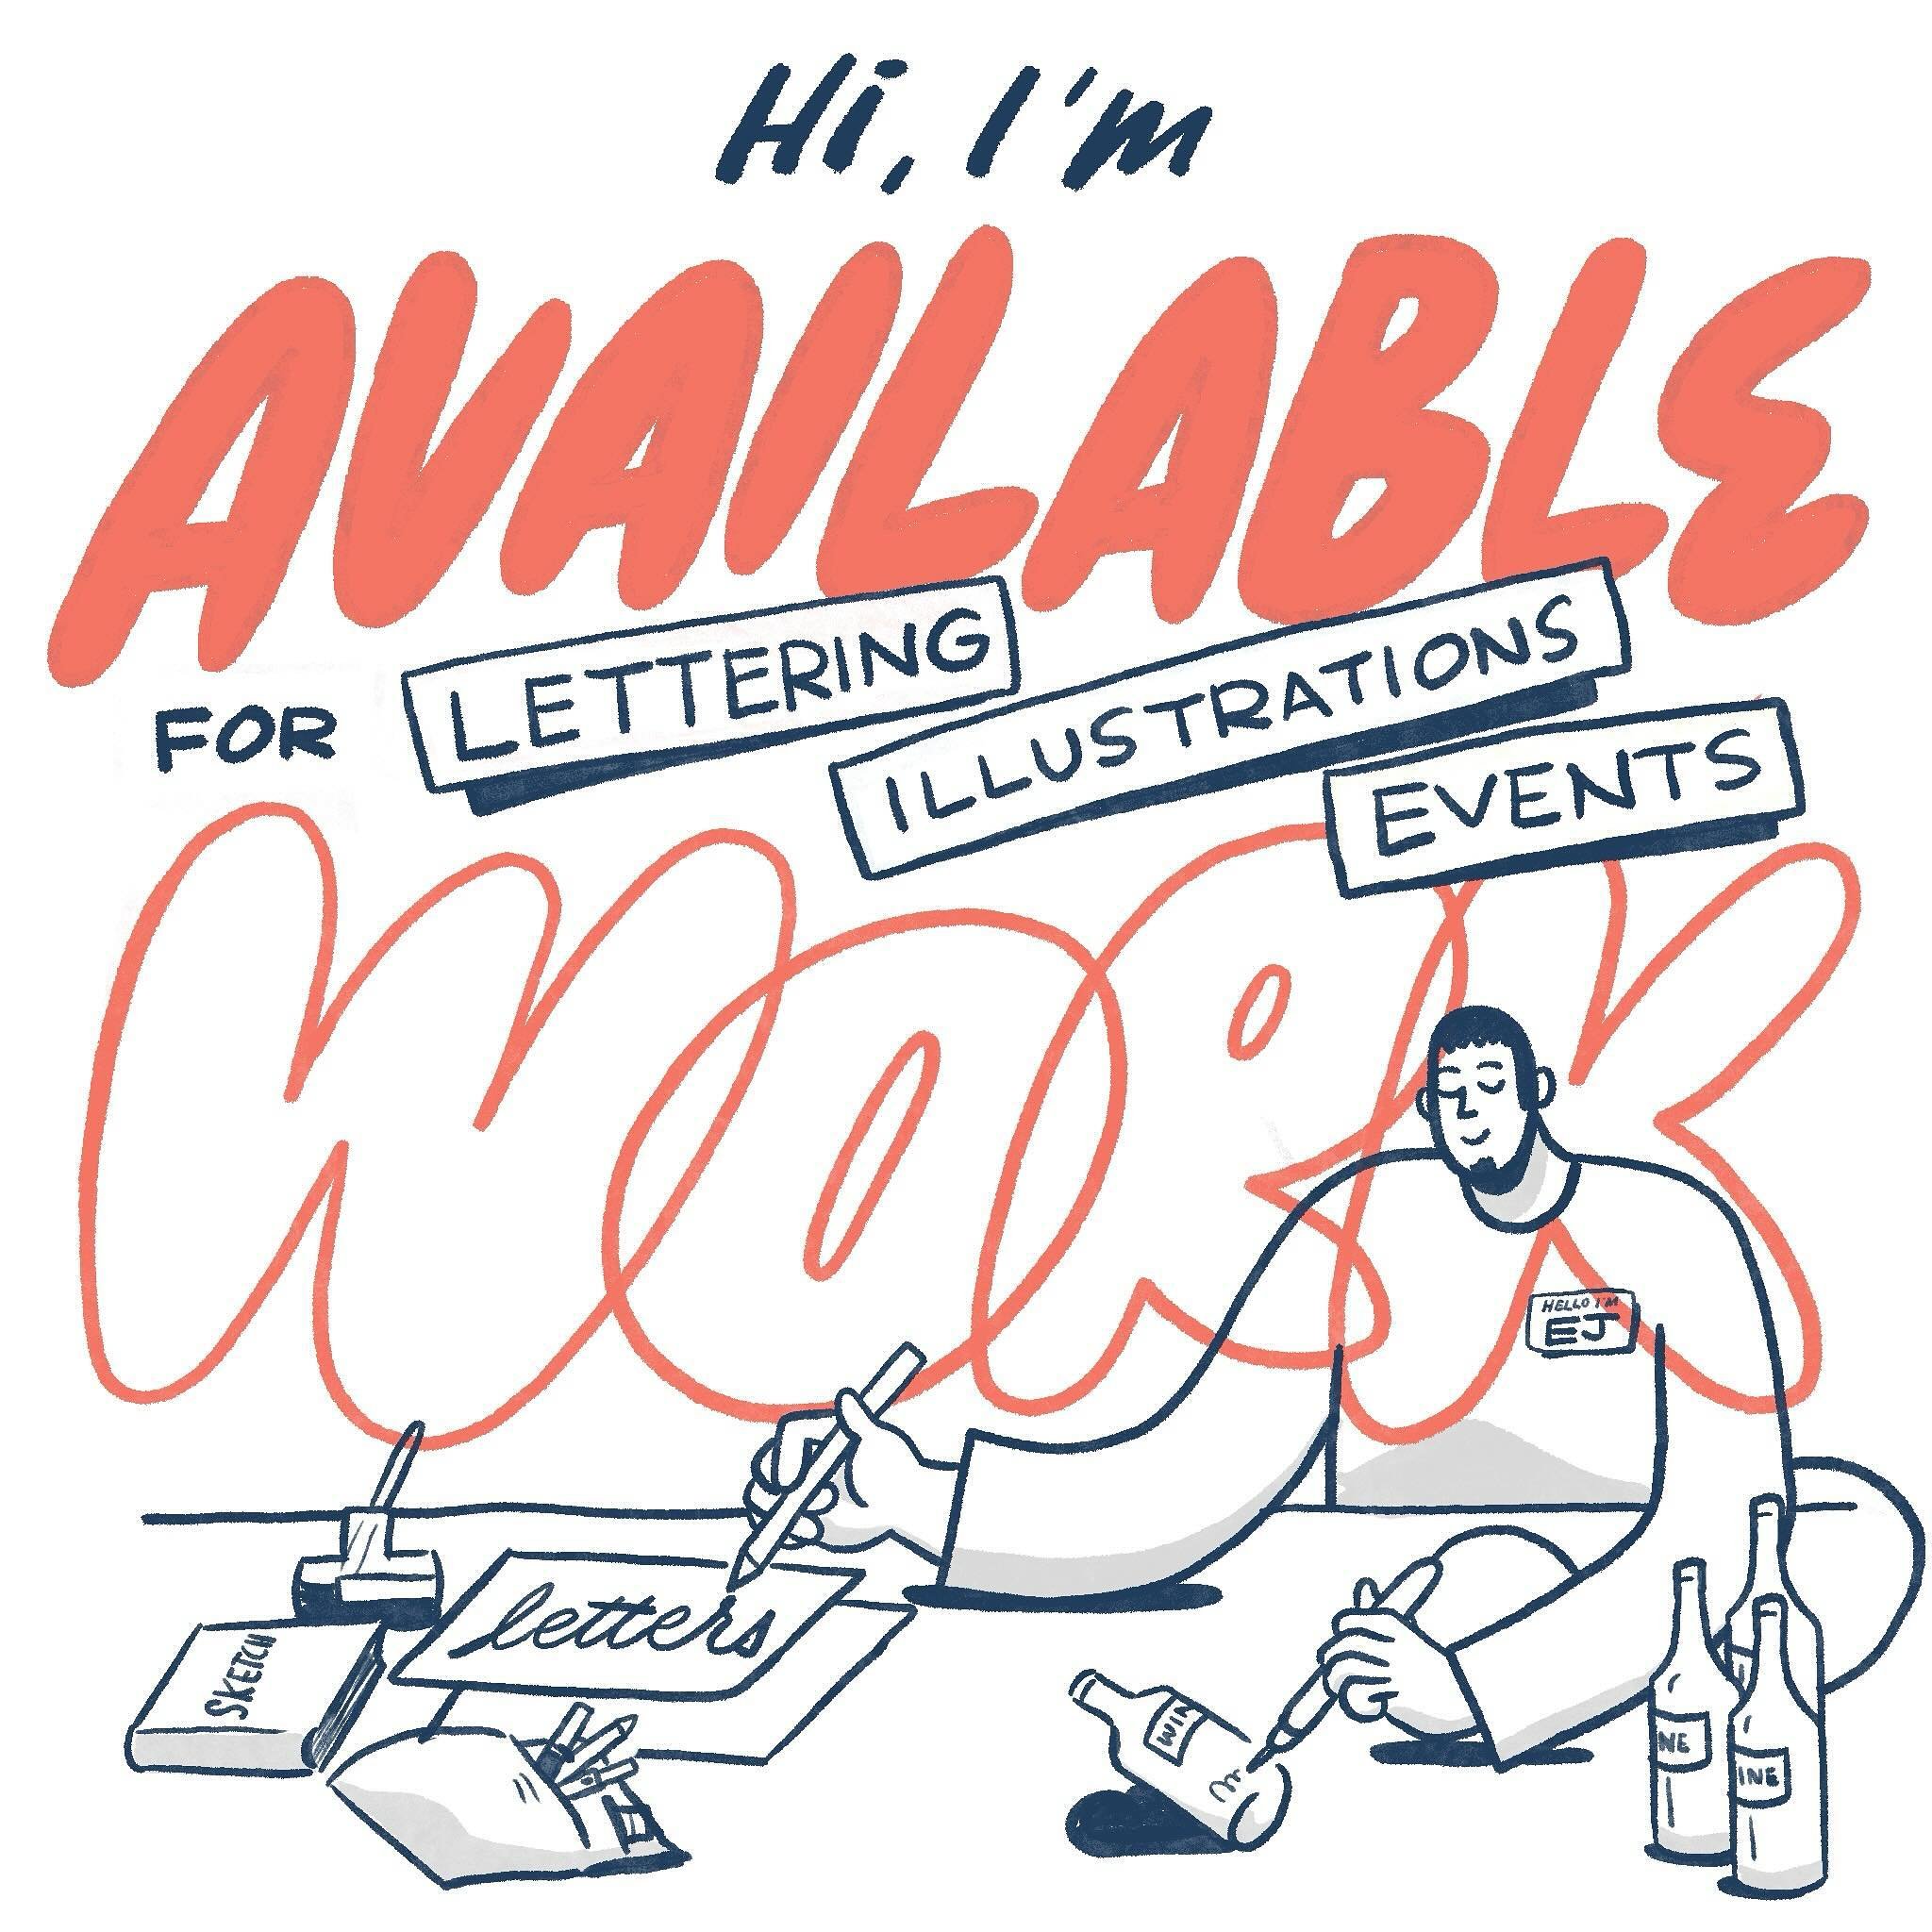 Excited to announce my return to freelancing! Despite recent challenges, leaving my full-time job led me to the dynamic world of freelancing. Offering lettering services to elevate brands, including luxury and tech companies. Let&rsquo;s connect and 